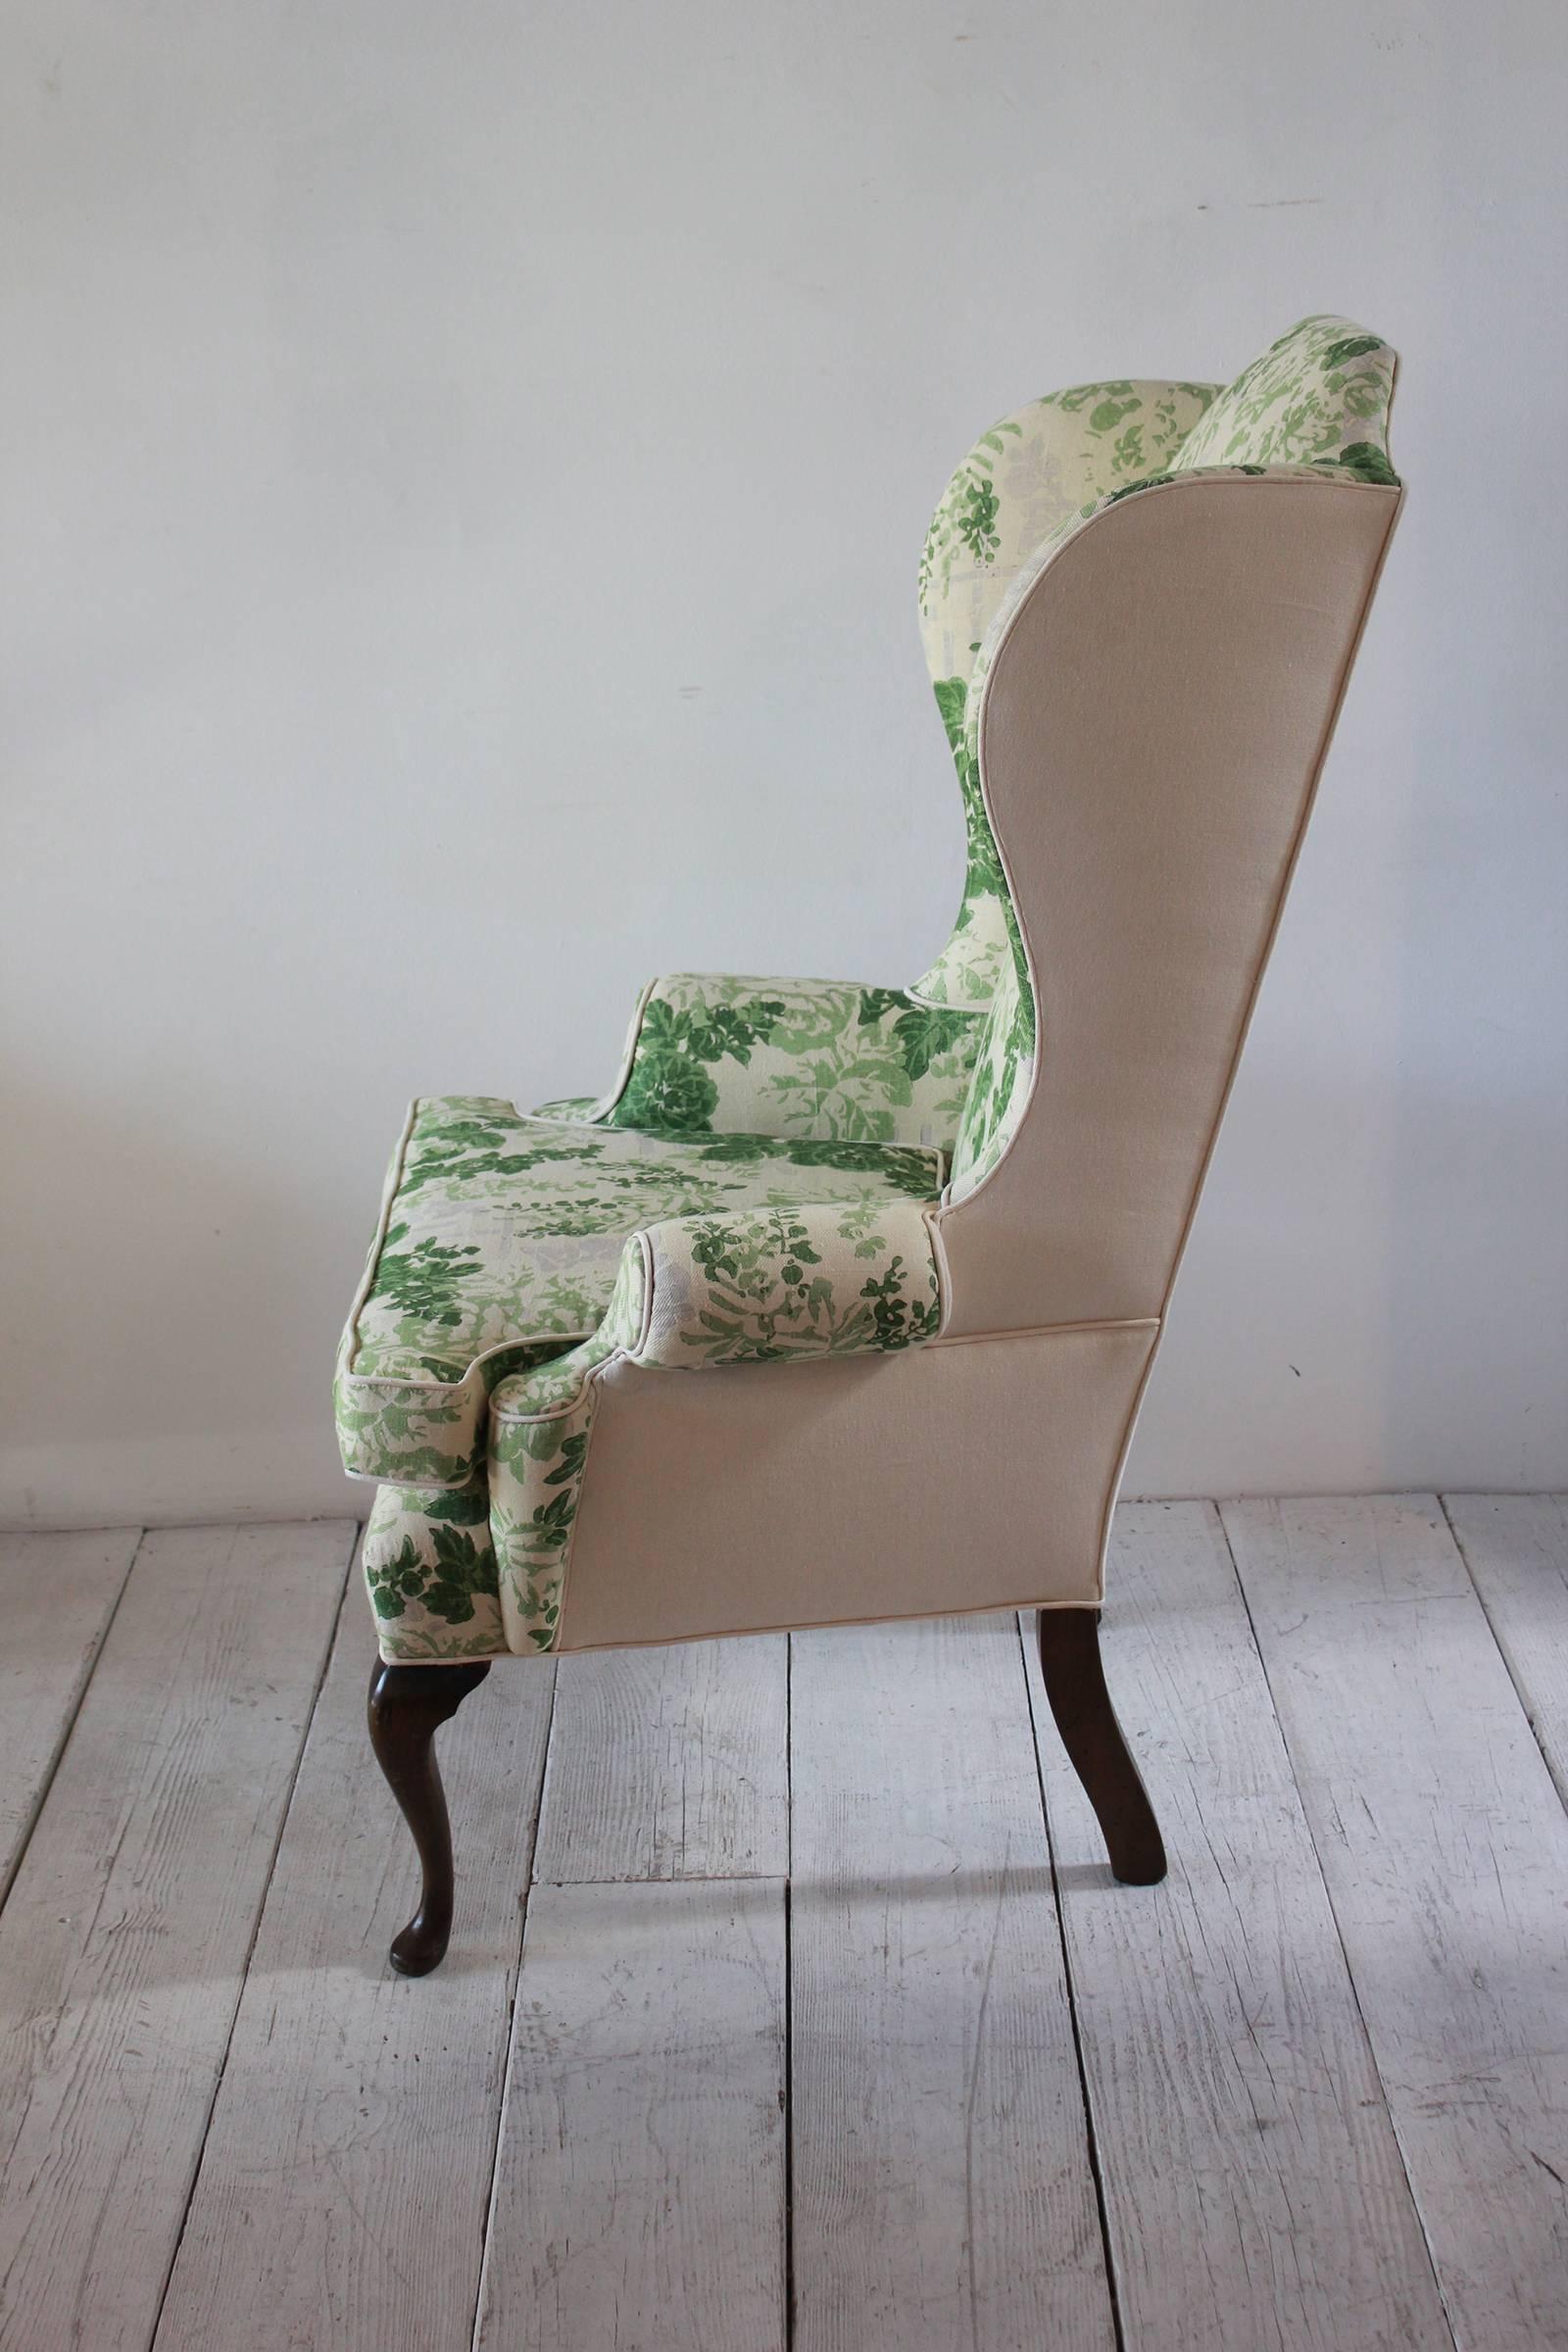 Vintage wing chair upholstered in green floral fabric with dark cabriole legs.